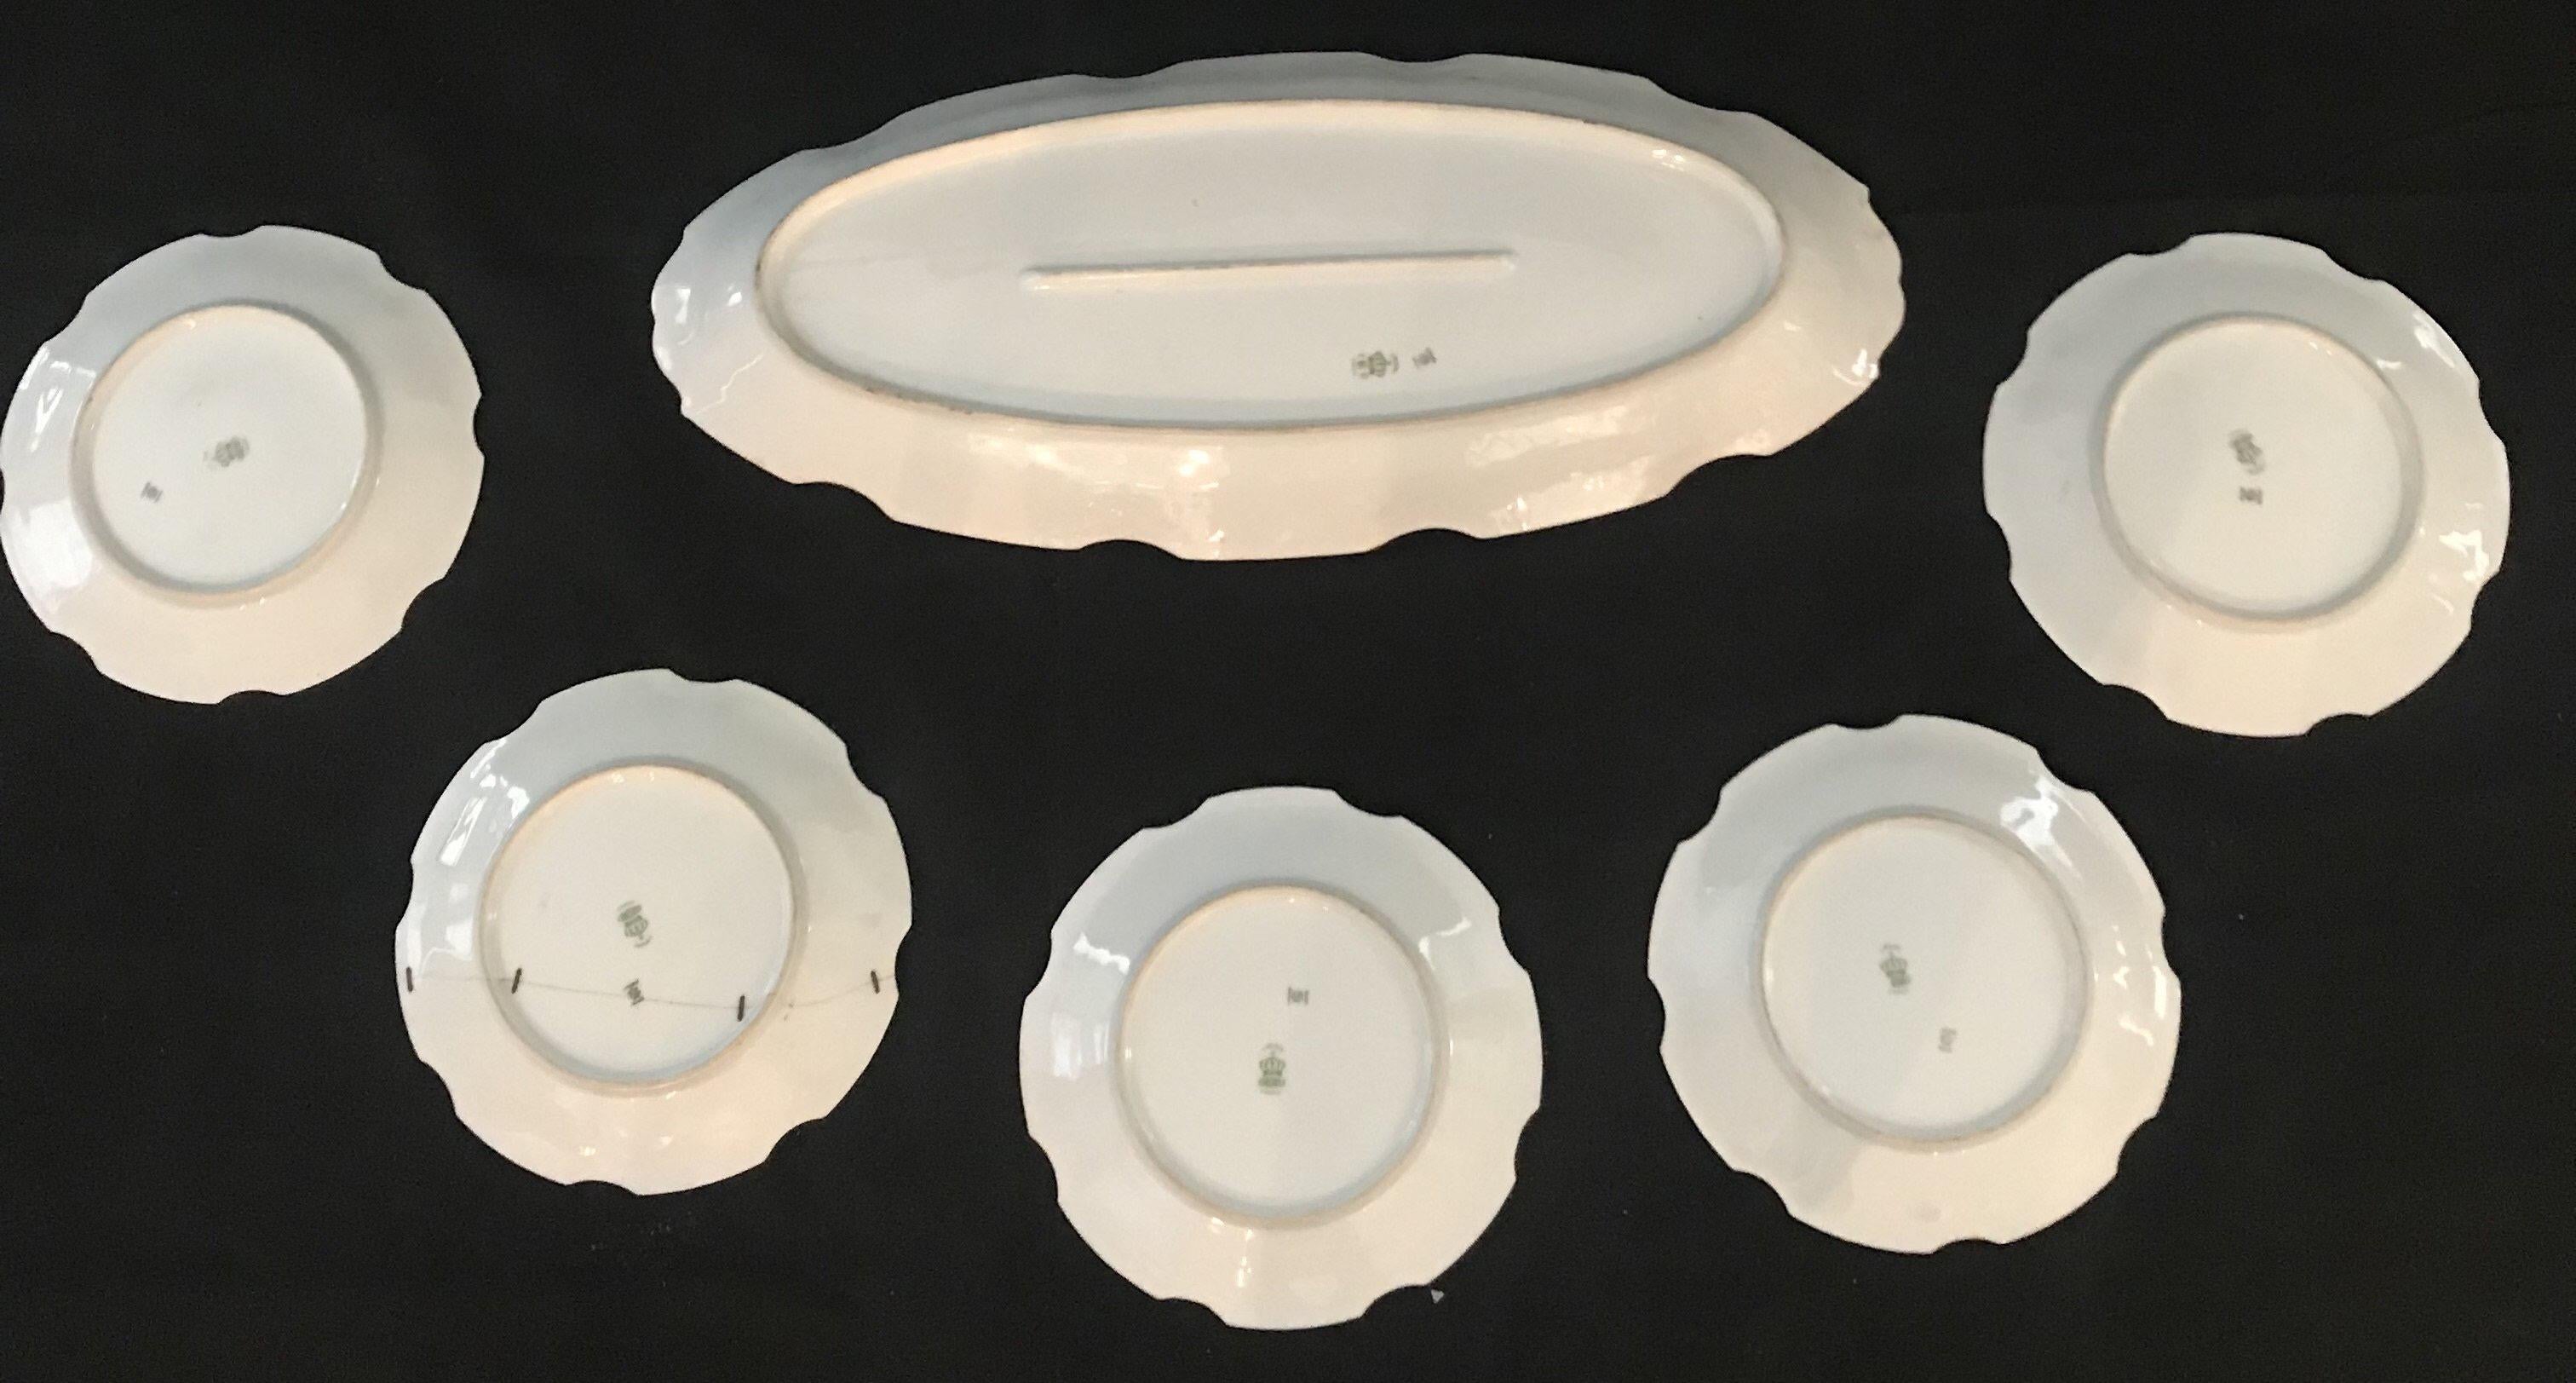 A vibrant set of five Limoges, France Bonet fish plates and one platter. Each plate and the platter are signed! A nicely shaped plate accented with 24-karat gold and completely hand painted and individually signed with flora and fish throughout; a